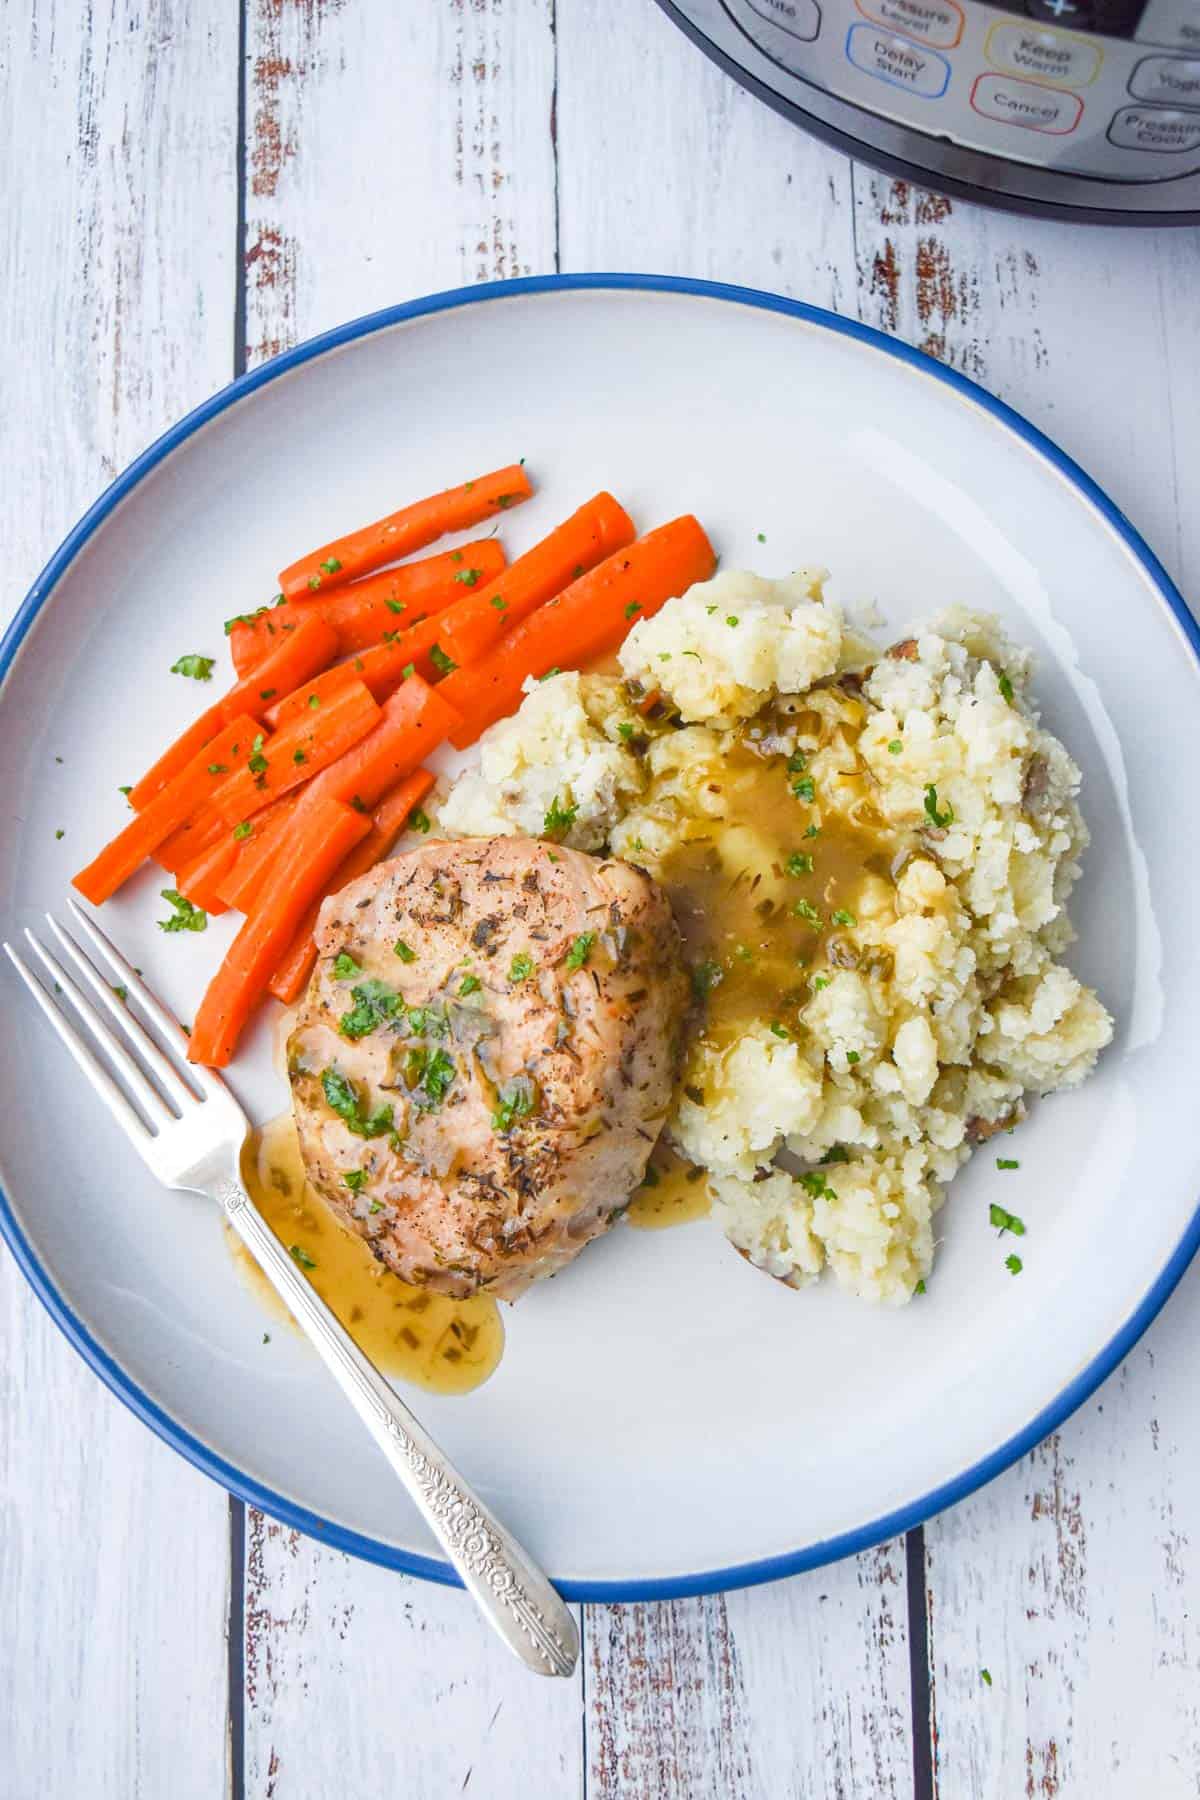 a cut pork chop laying on mashed potatoes and carrots and covered in gravy on a blue rimmed plate